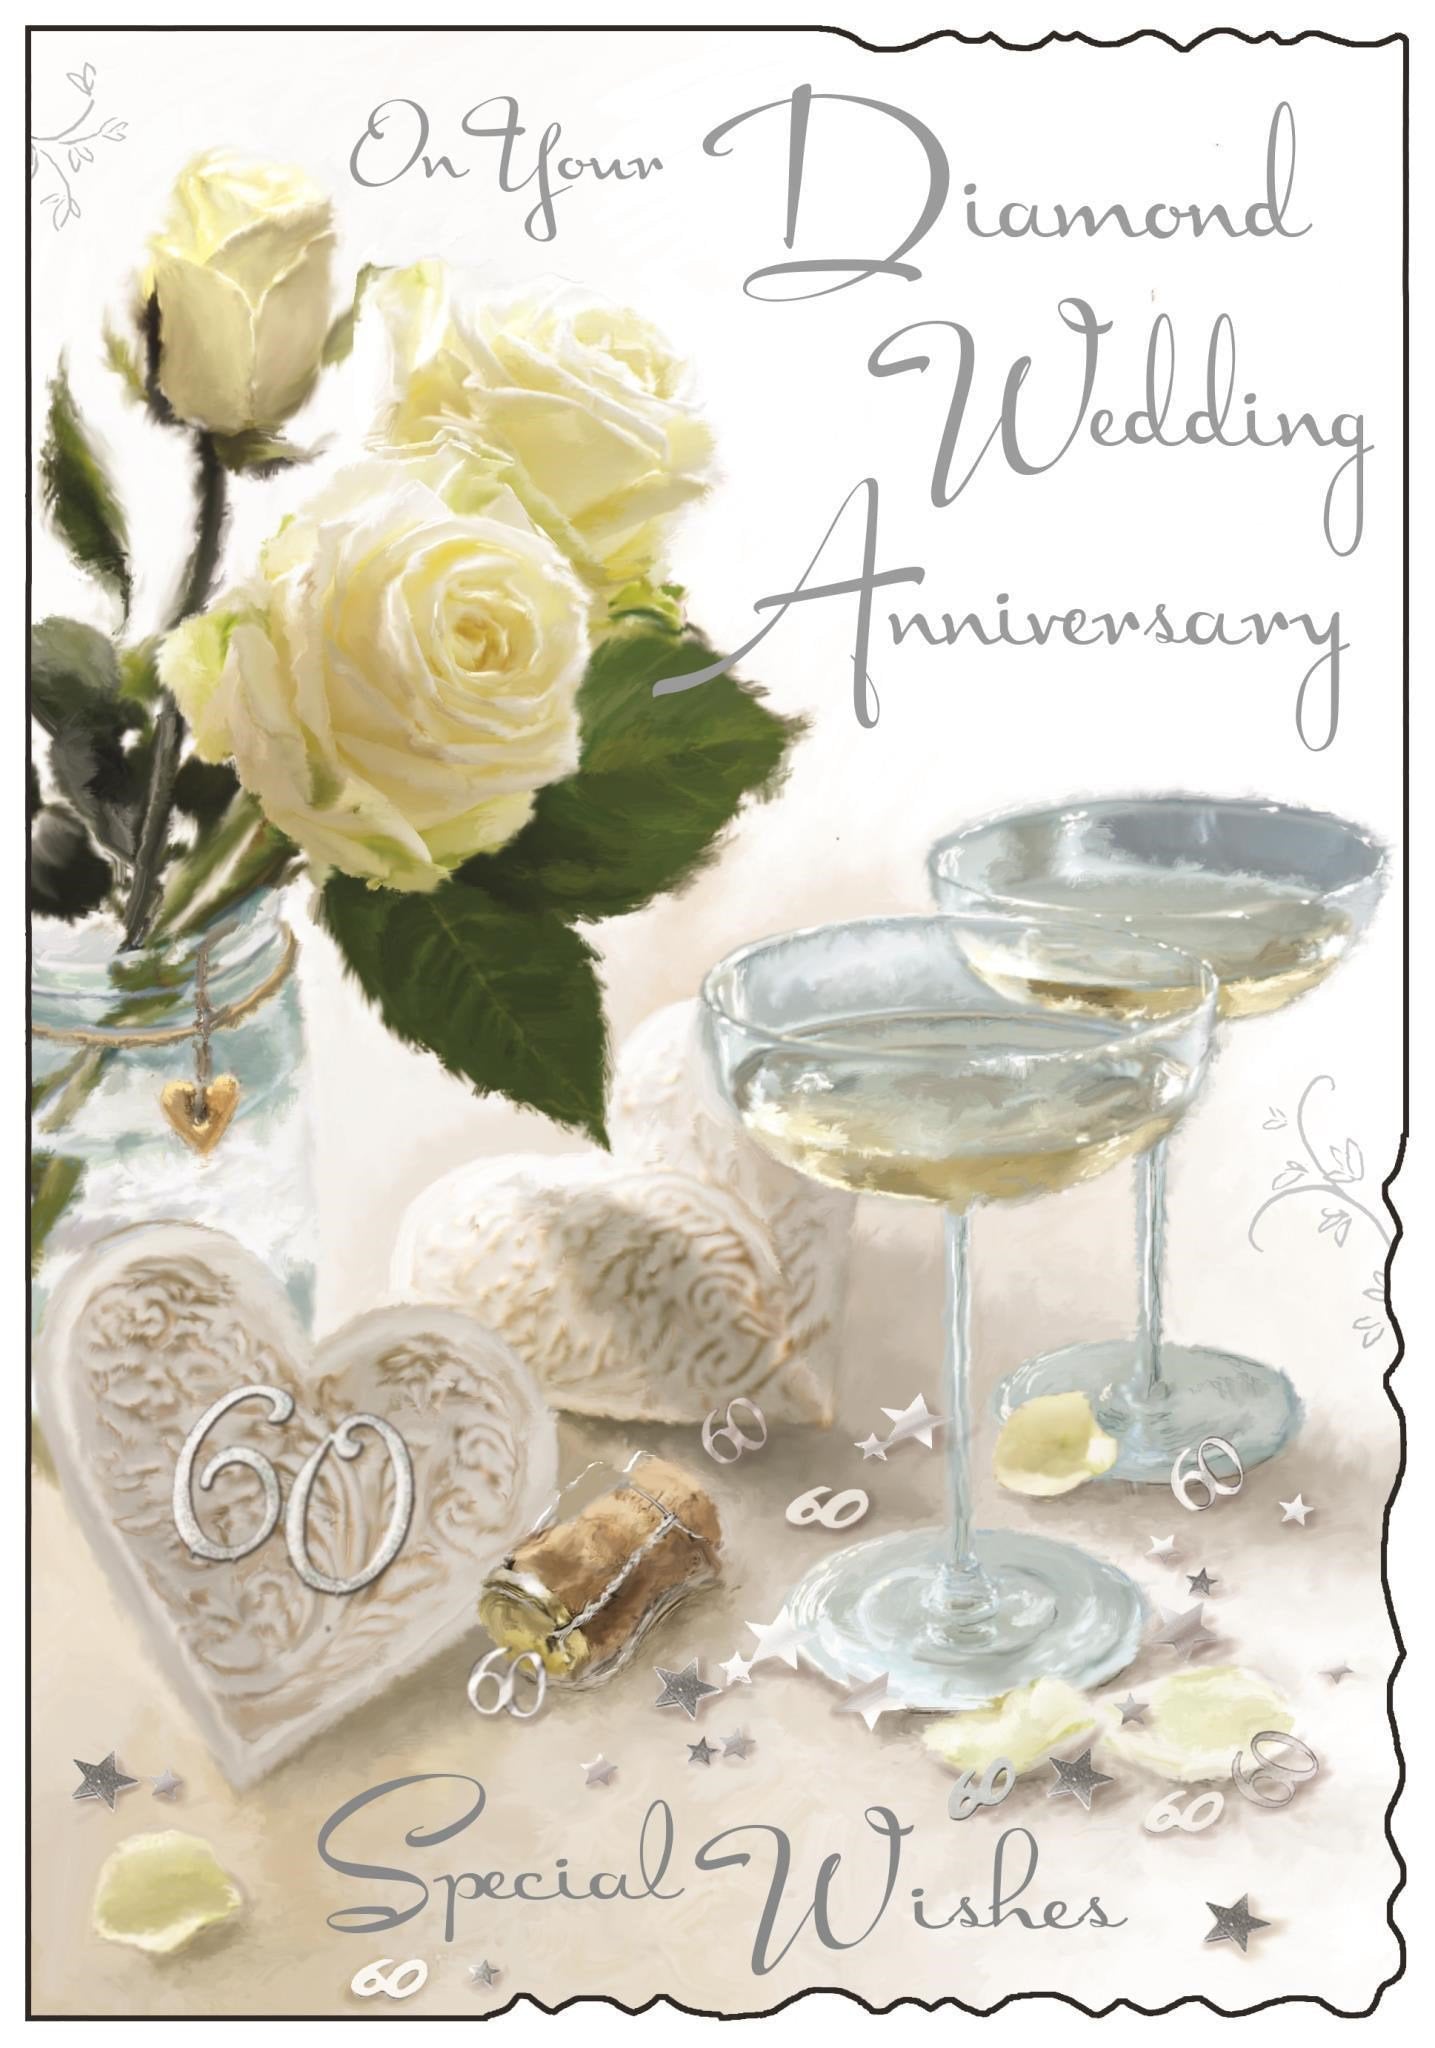 Front of Diamond 60th Anniversary Toast Greetings Card